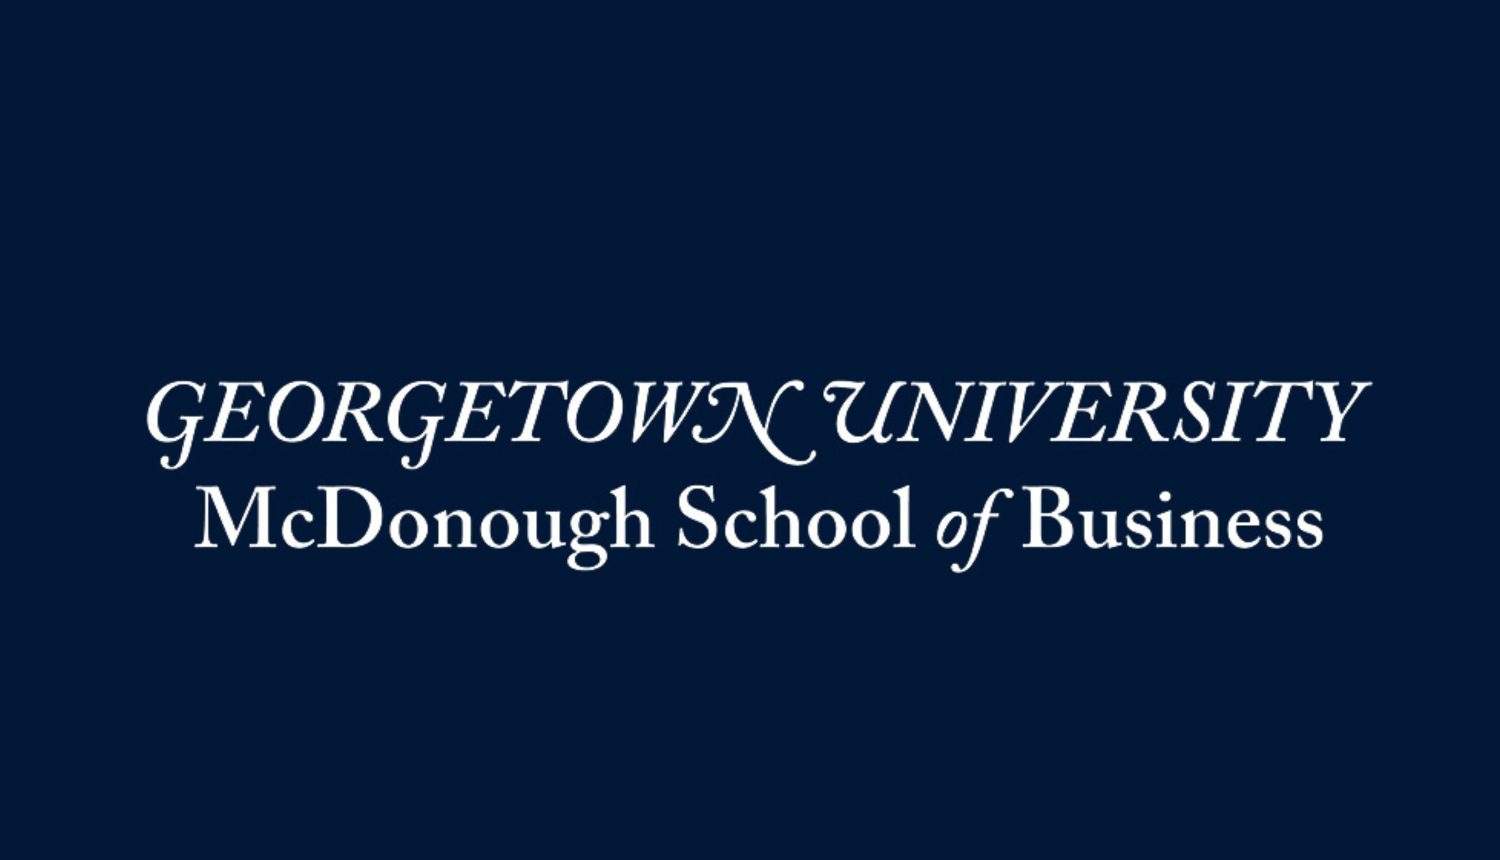 Georgetown University students on Campus for a special learning experience